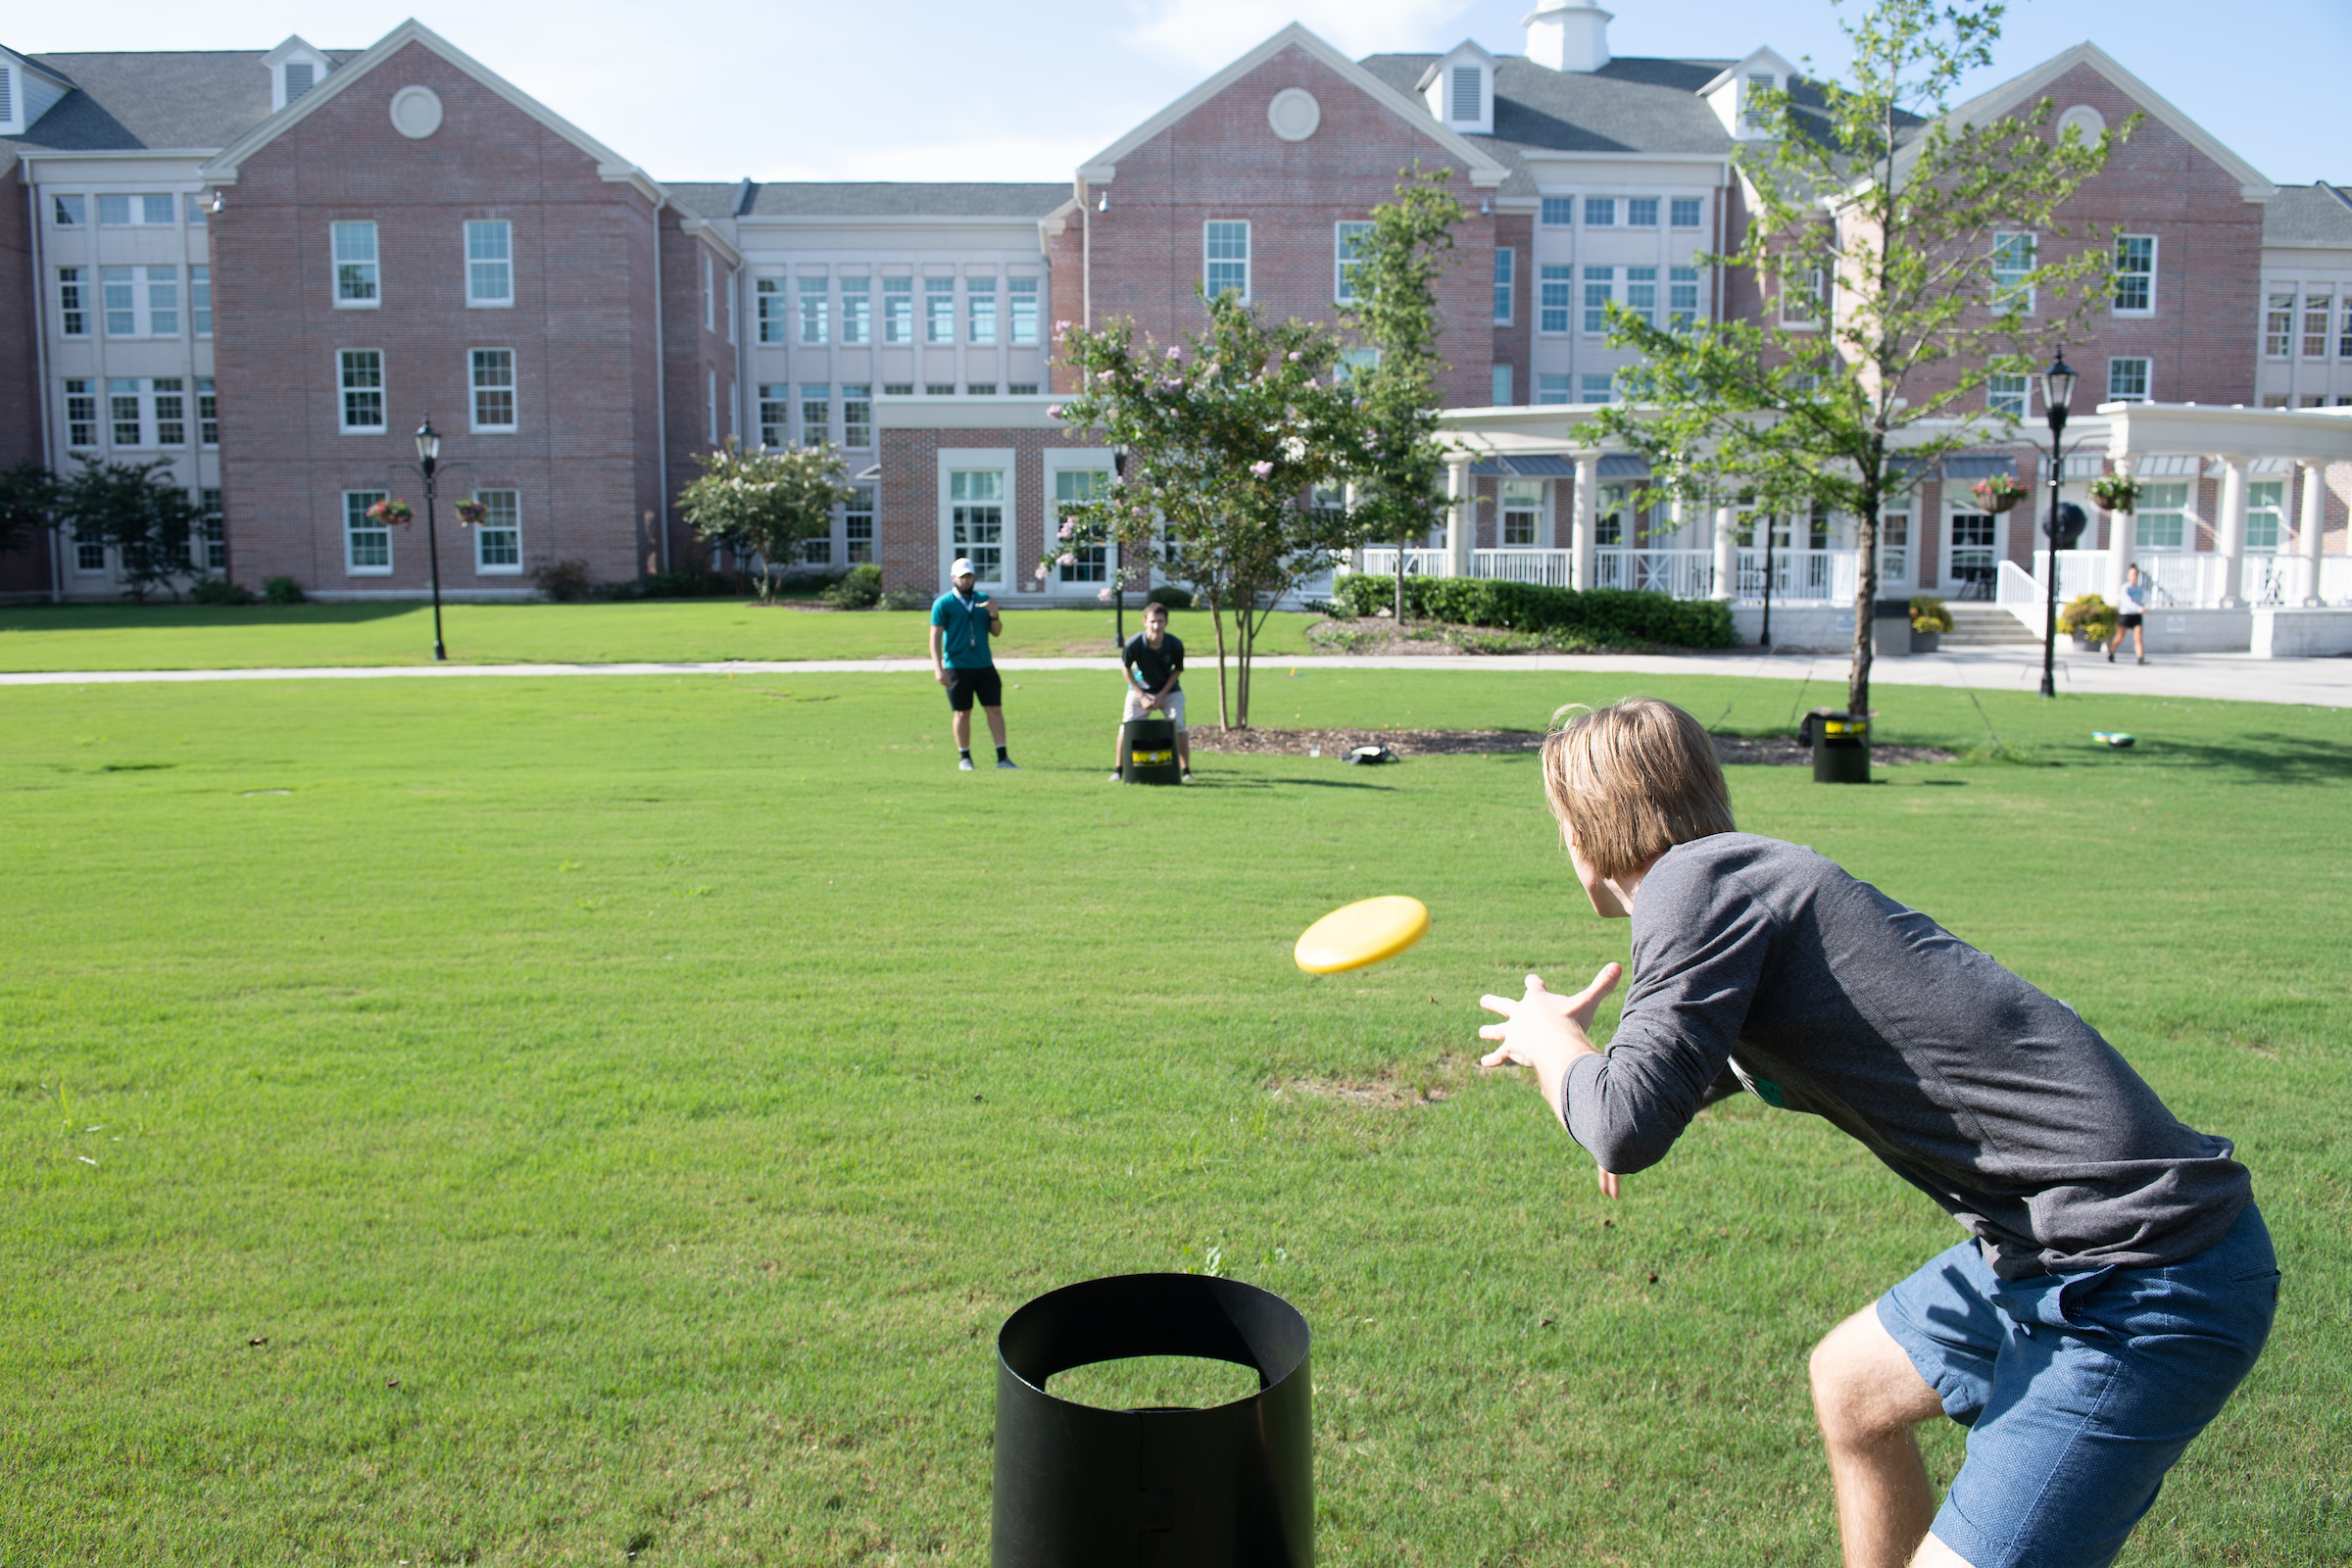 Resident advisers at Coastal Carolina University meet for an annual cookout as part of their training before they welcome 4,600 resident students to campus. The cookout is a chance to build and foster relationships and connections among the staff.